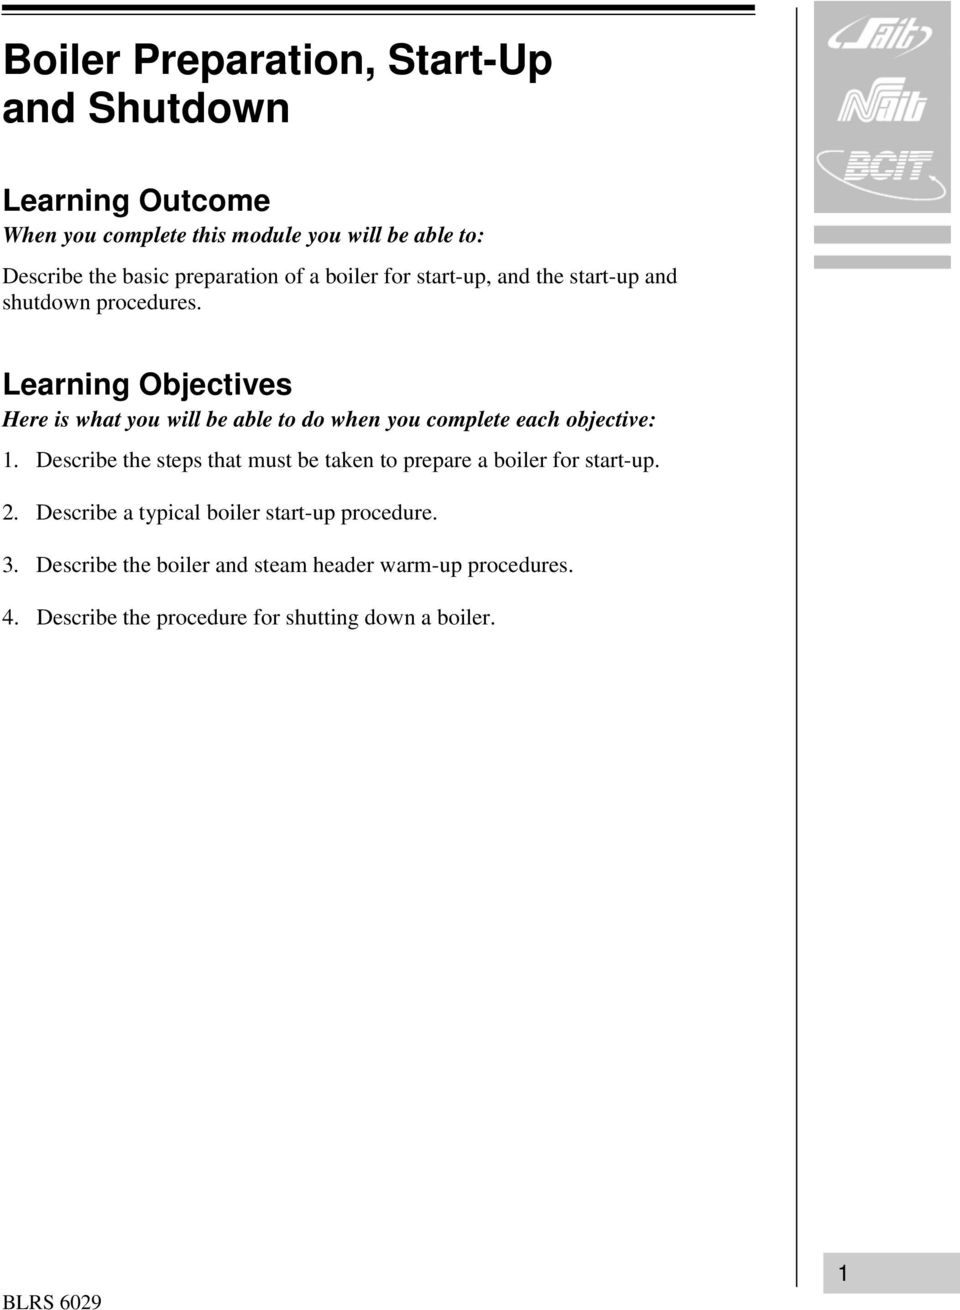 Learning Objectives Here is what you will be able to do when you complete each objective: 1.